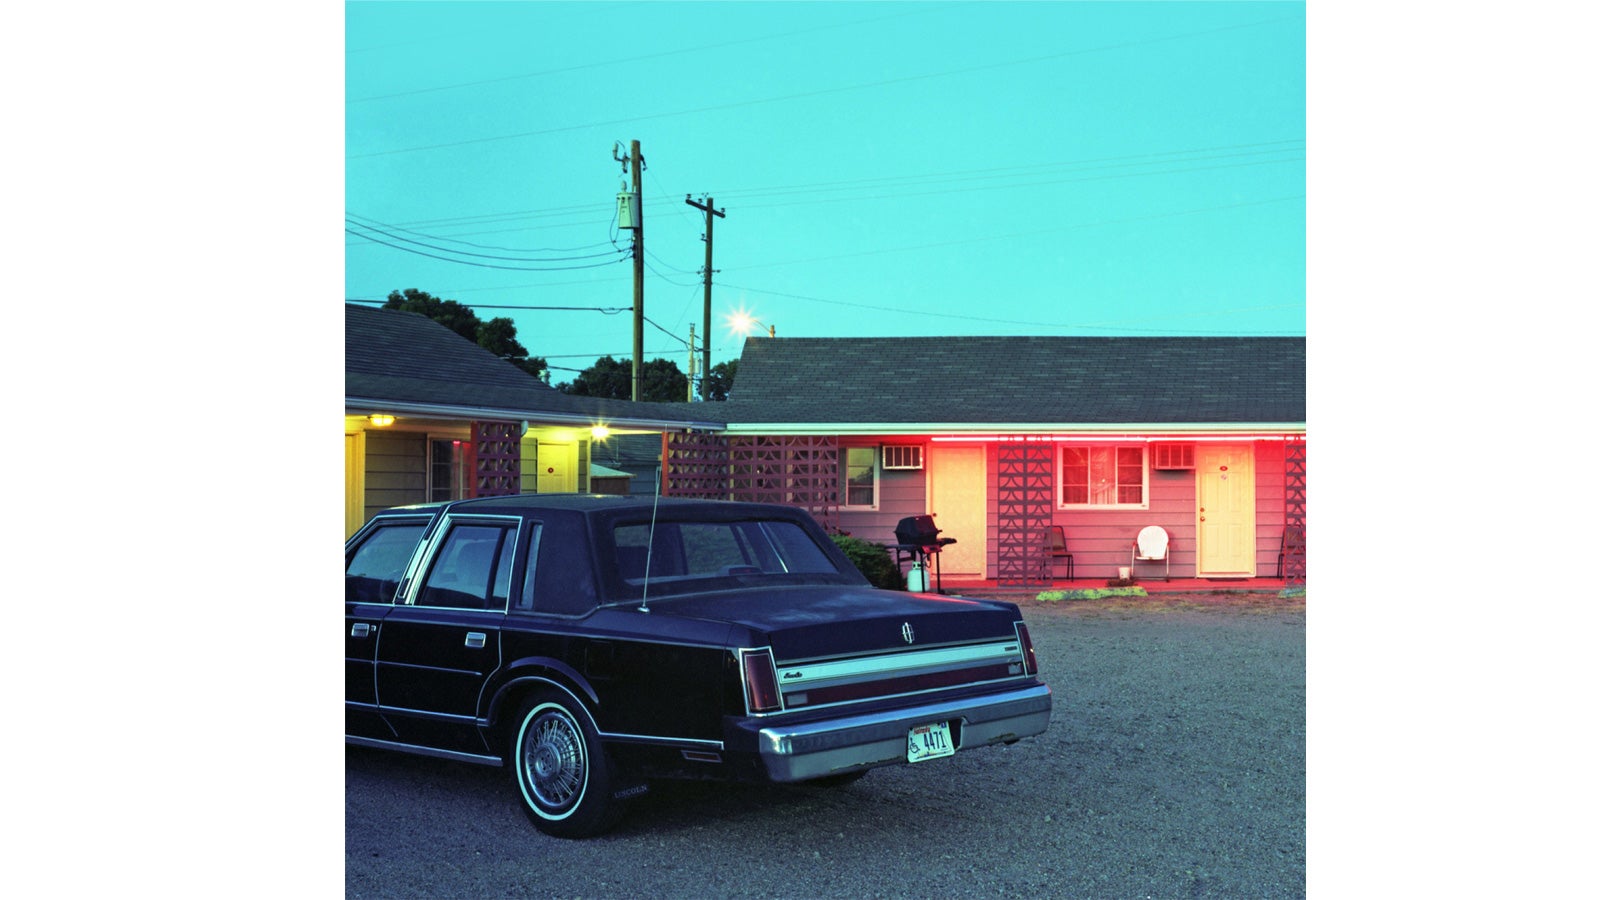 A vintage car in front of a motel at dusk